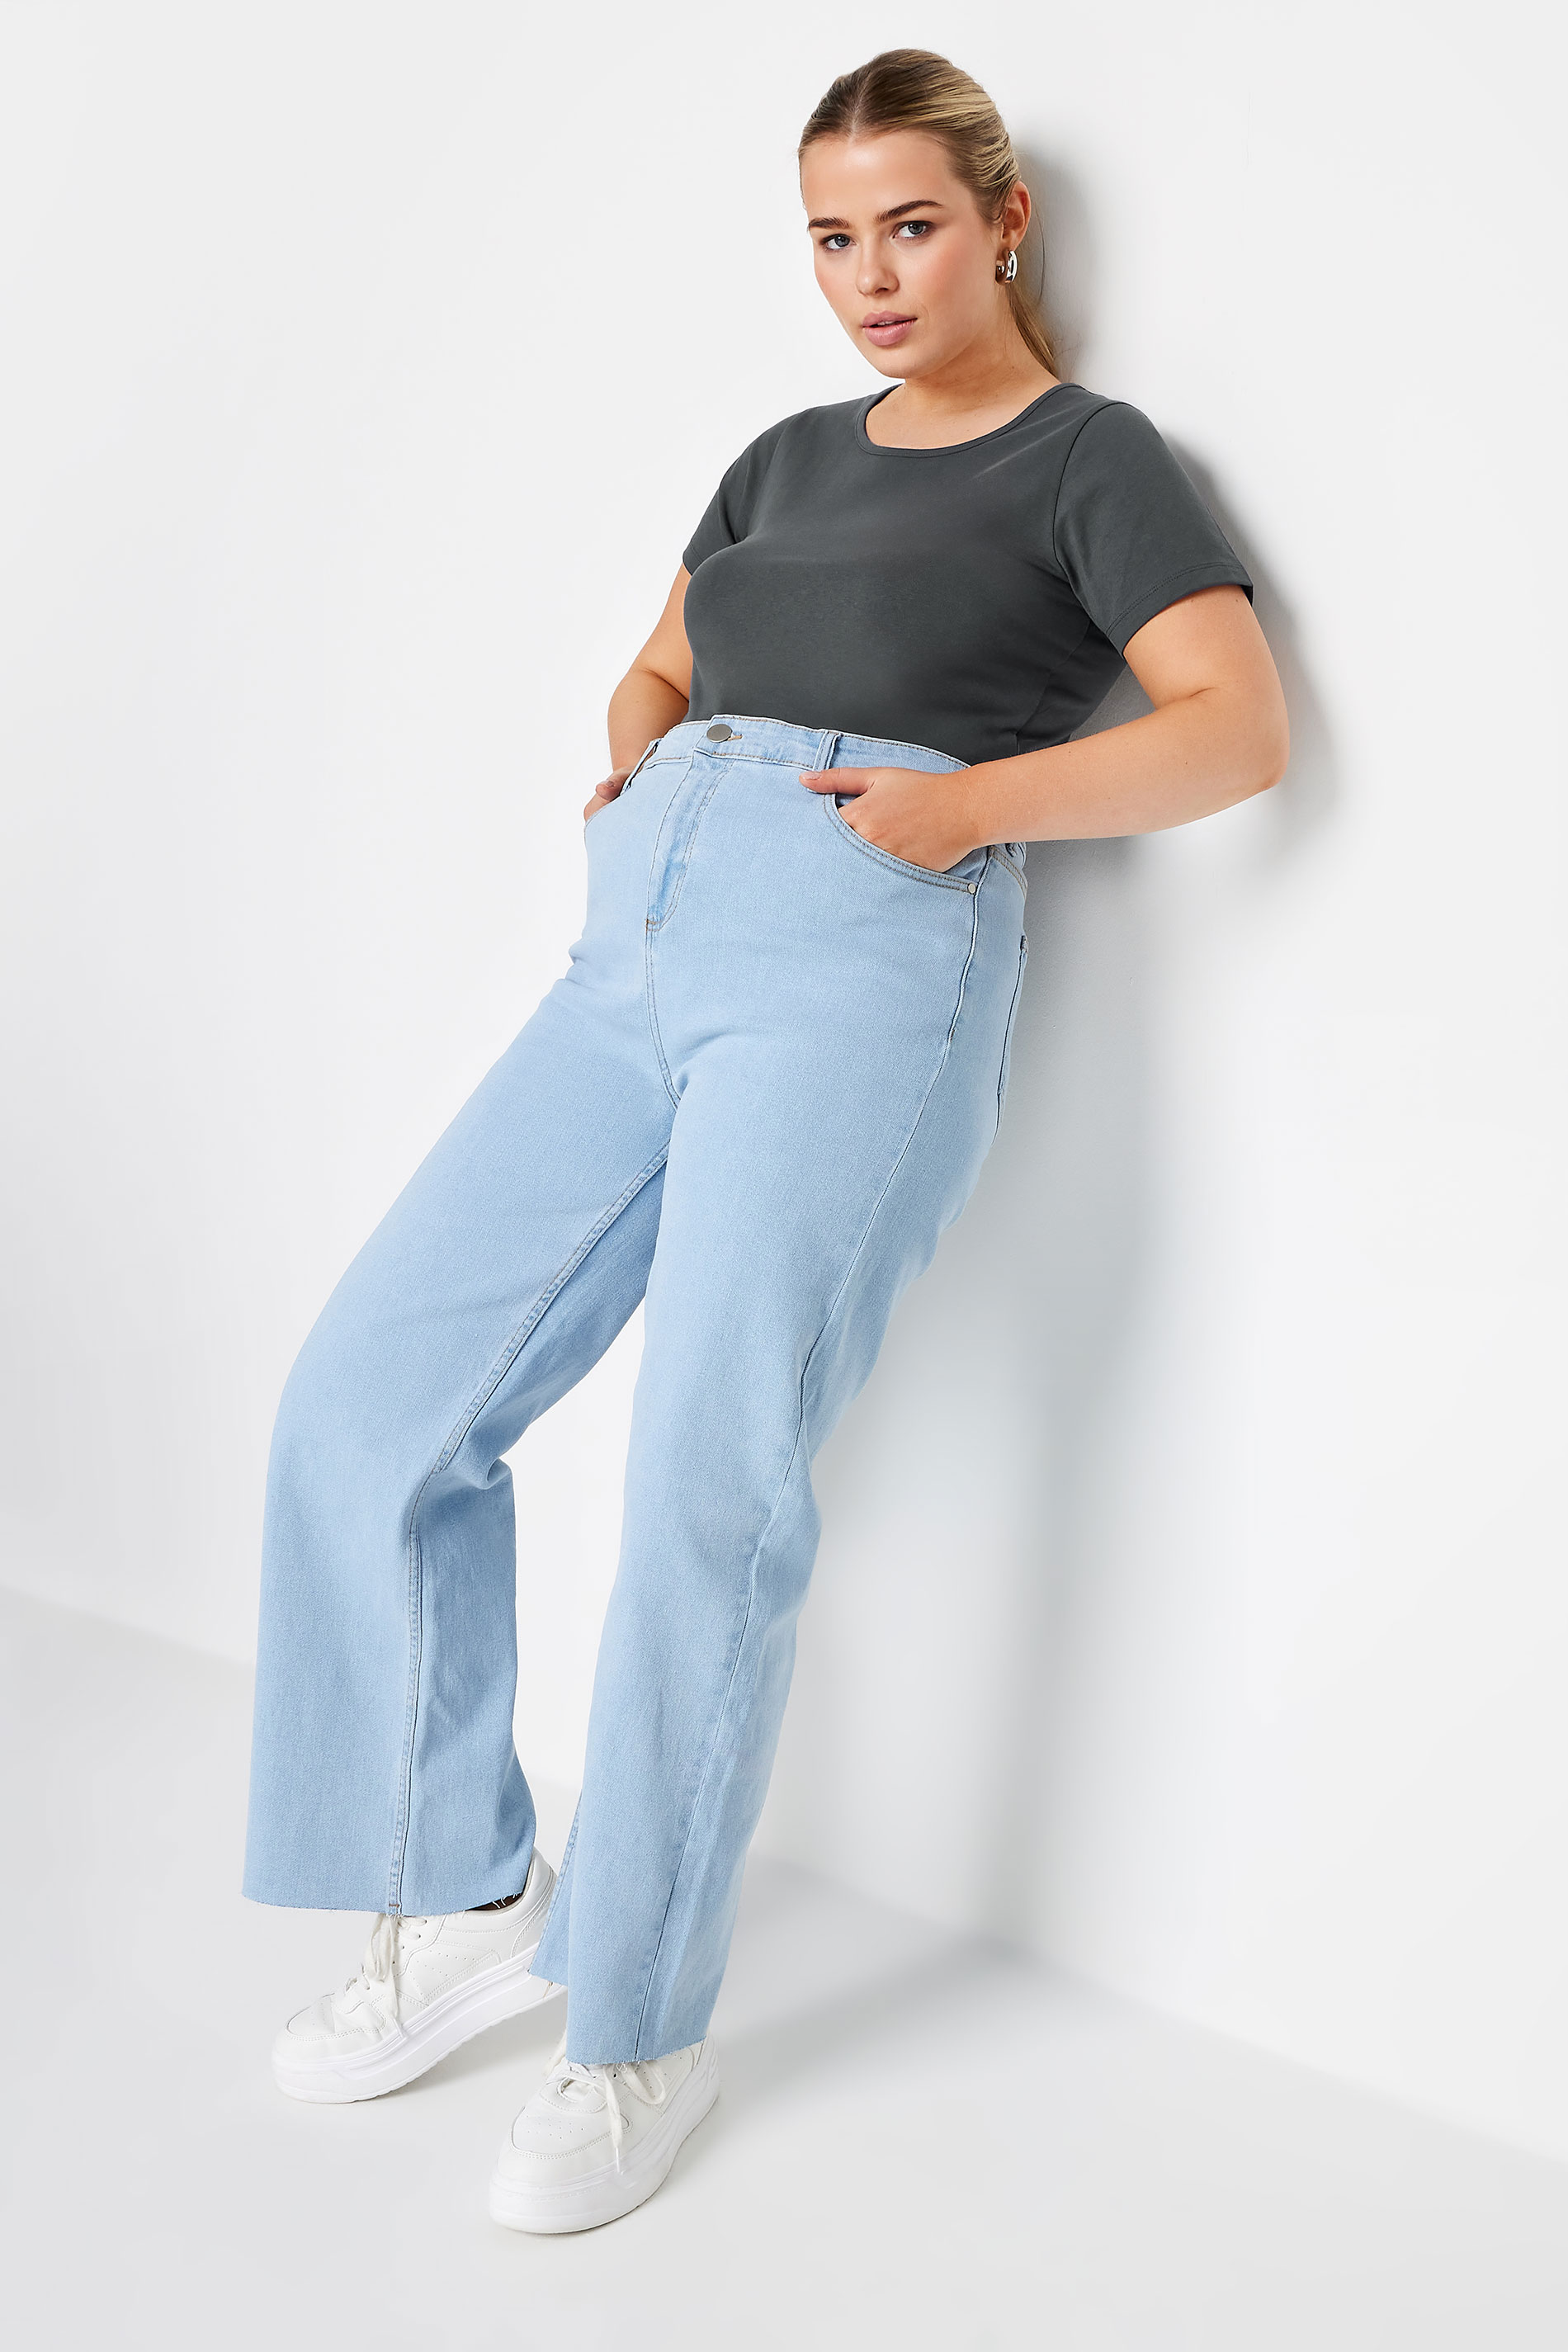 YOURS Plus Size Charcoal Grey Short Sleeve Bodysuit | Yours Clothing 2